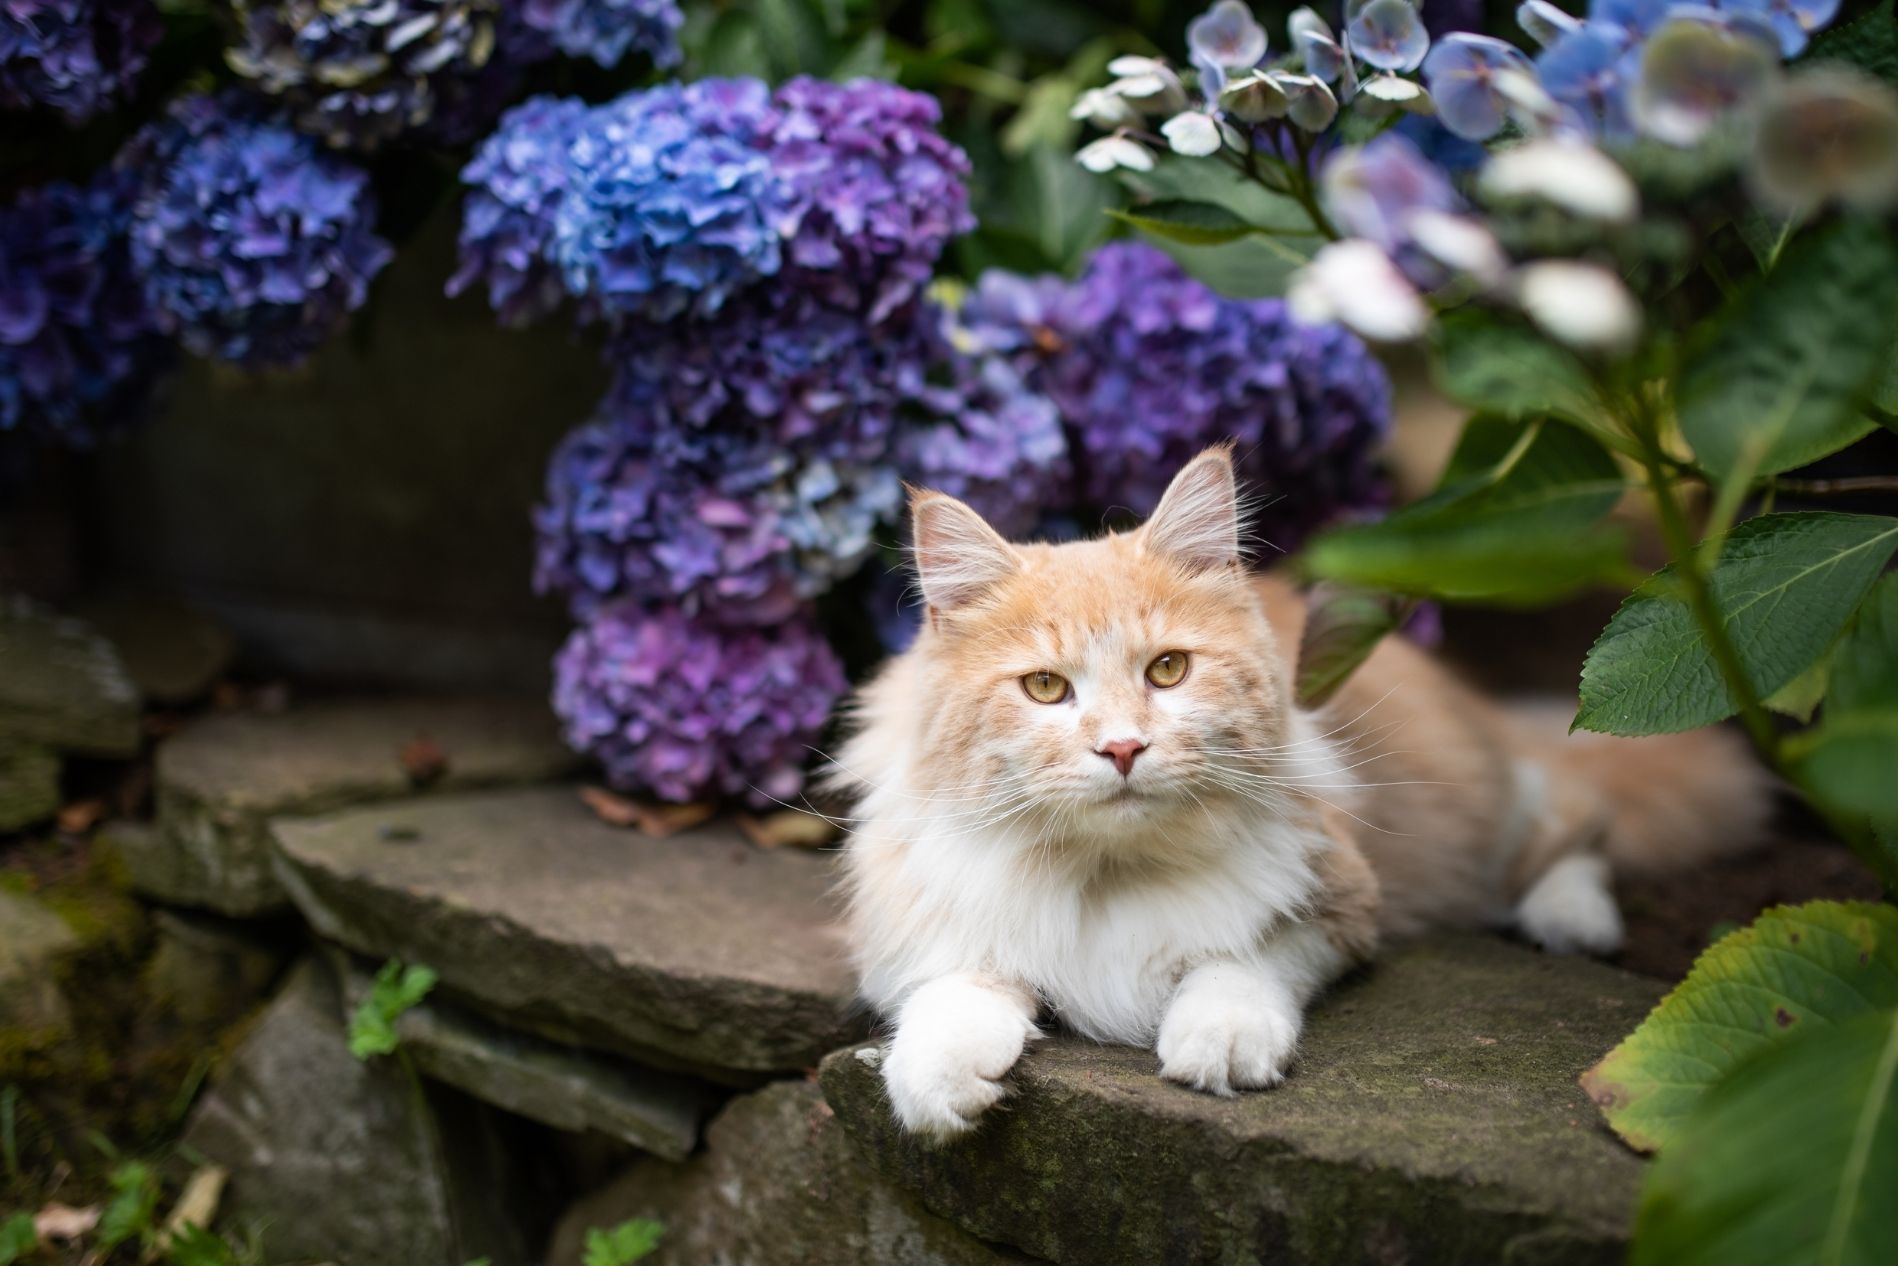 Spring Flowers bring May Flowers - Paws & Claws Animal Hospital